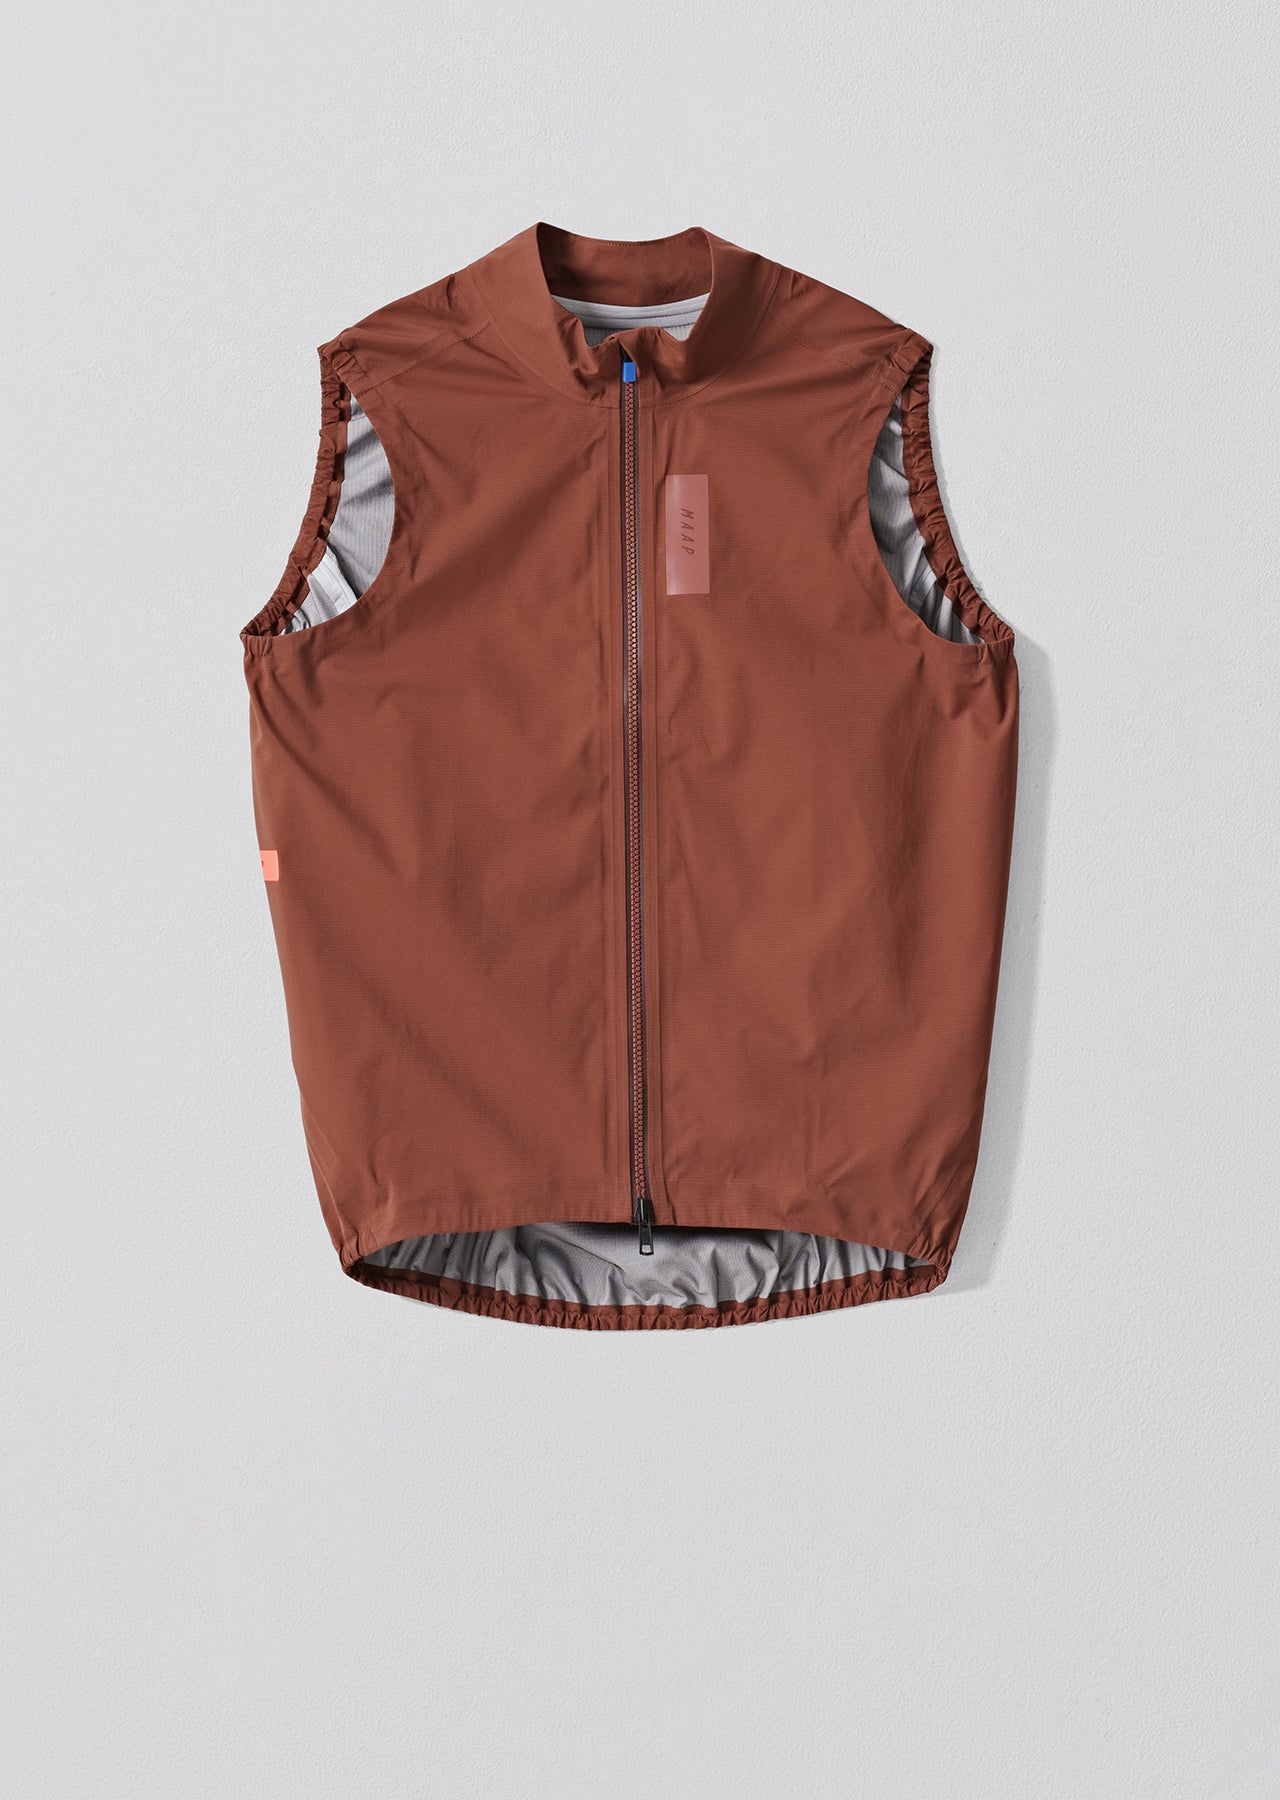 Atmos Vest - MAAP Cycling Apparel